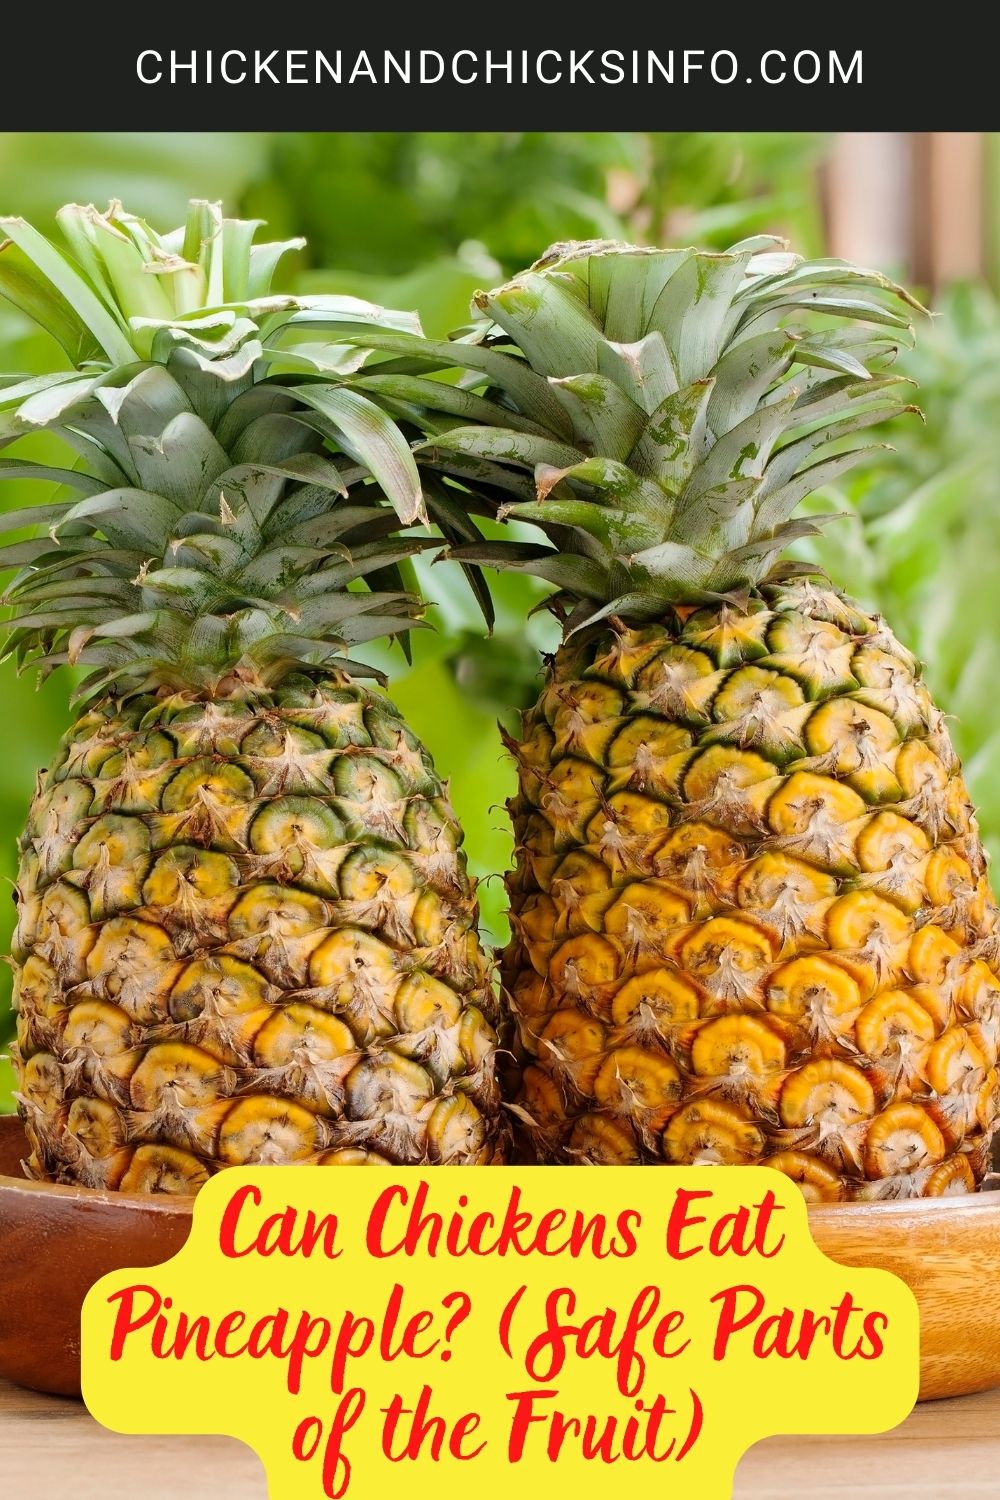 Can Chickens Eat Pineapple? (Safe Parts of the Fruit) poster.
